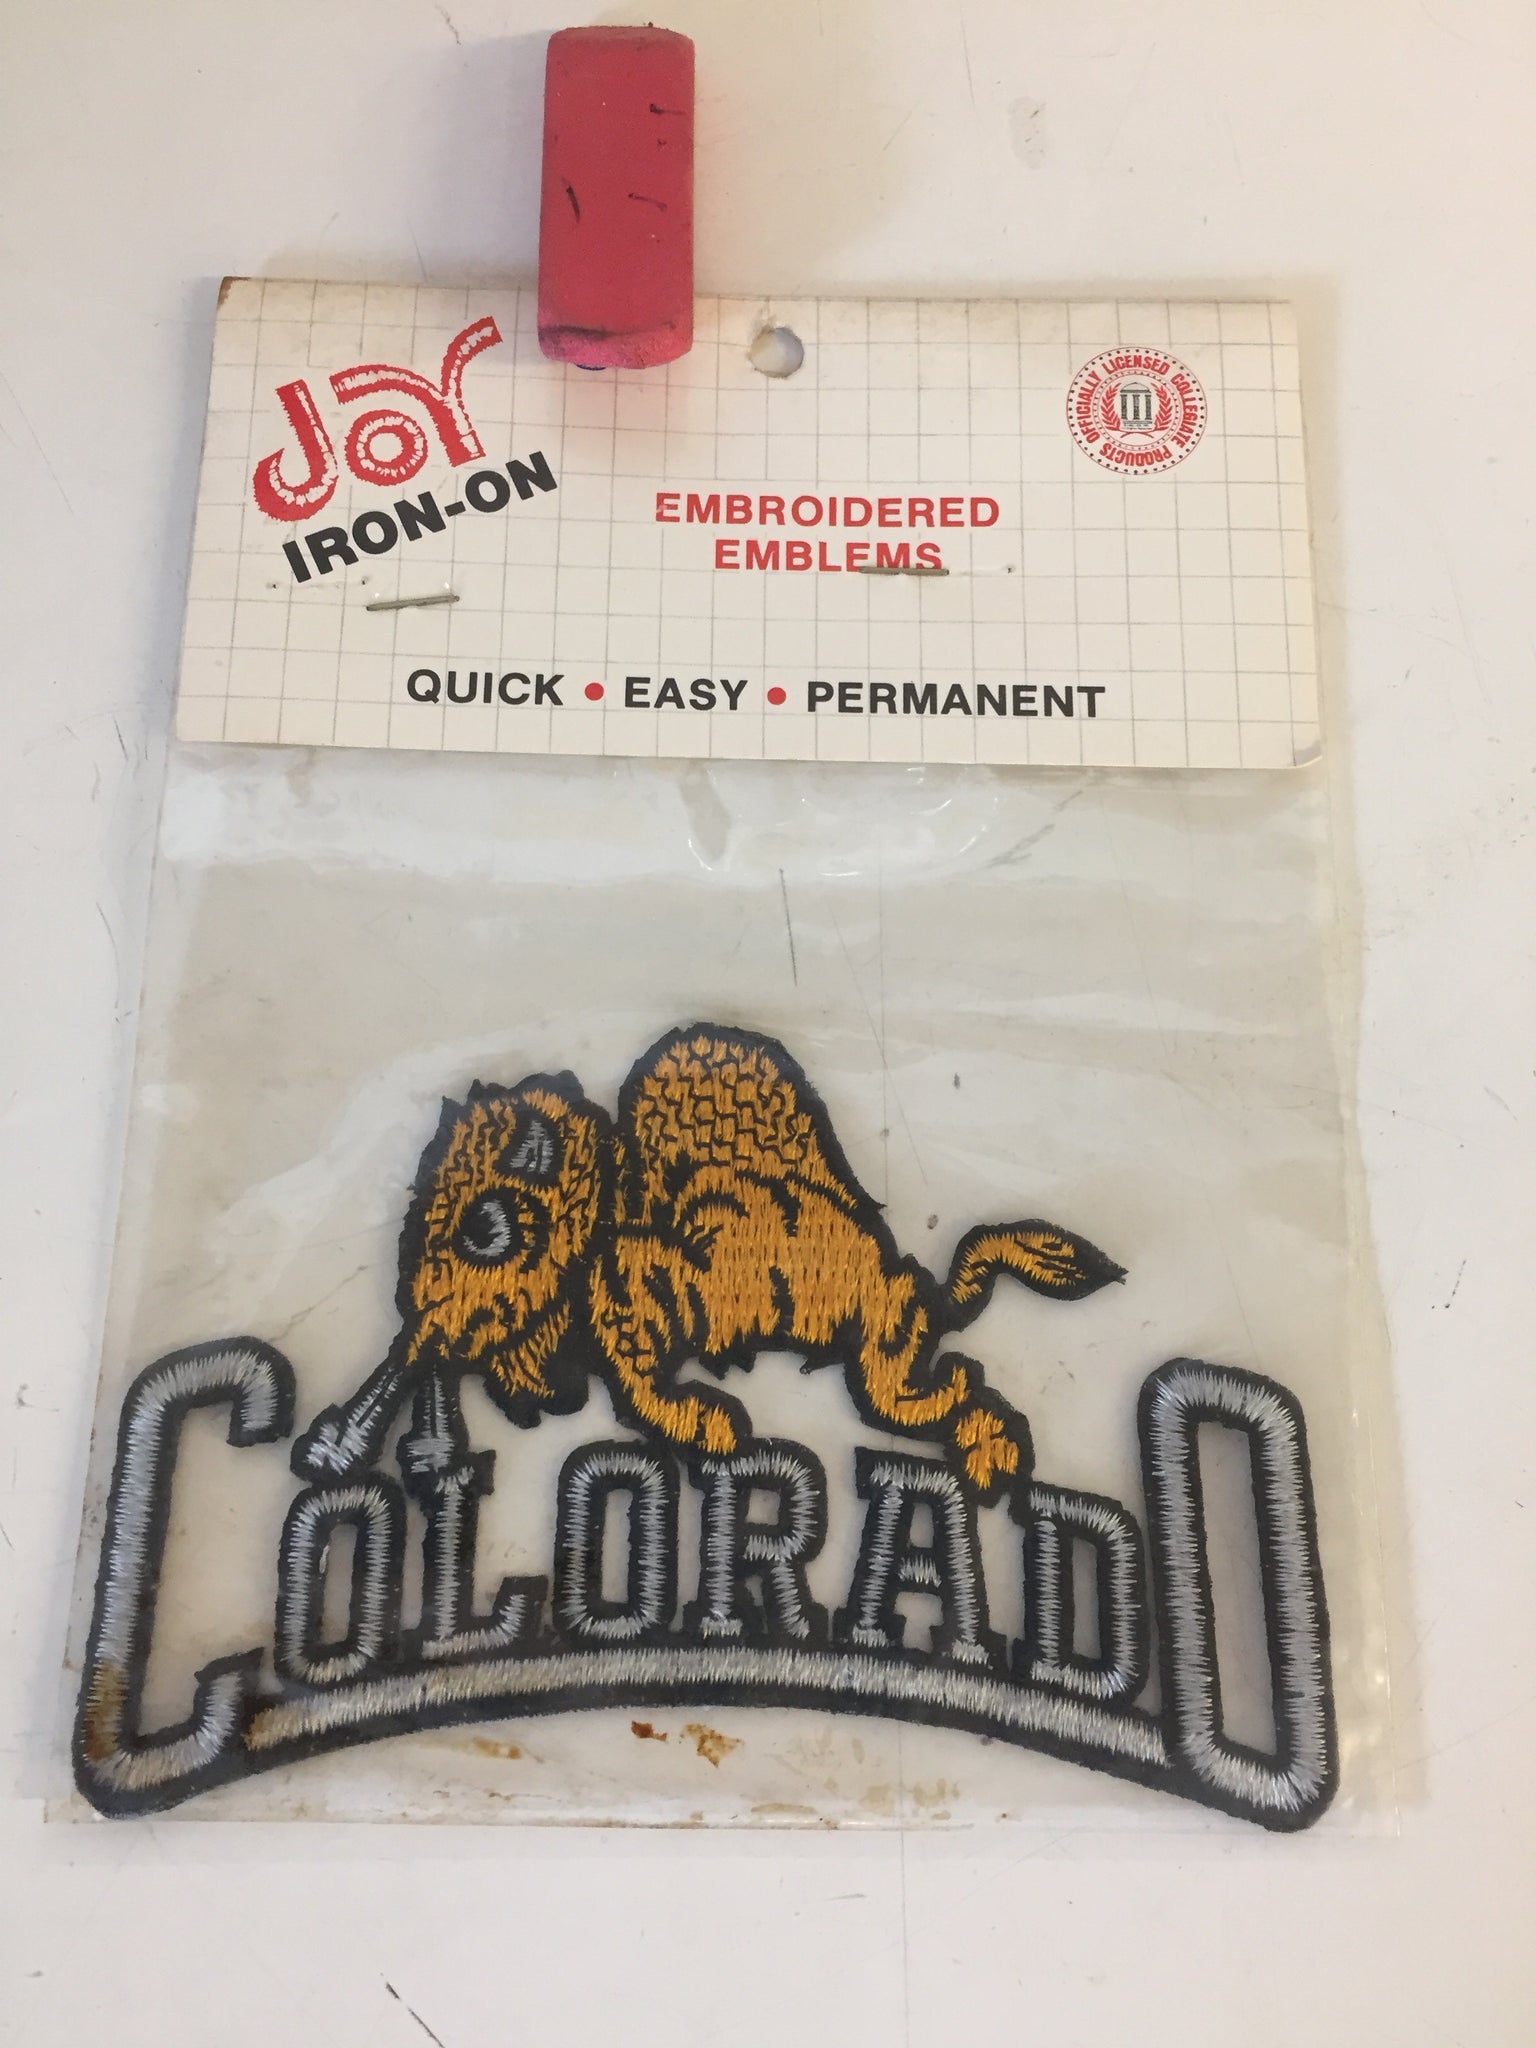 Vintage NOS 1990's University Of Colorado Buffaloes Iron-On Embroidered Emblems Patch